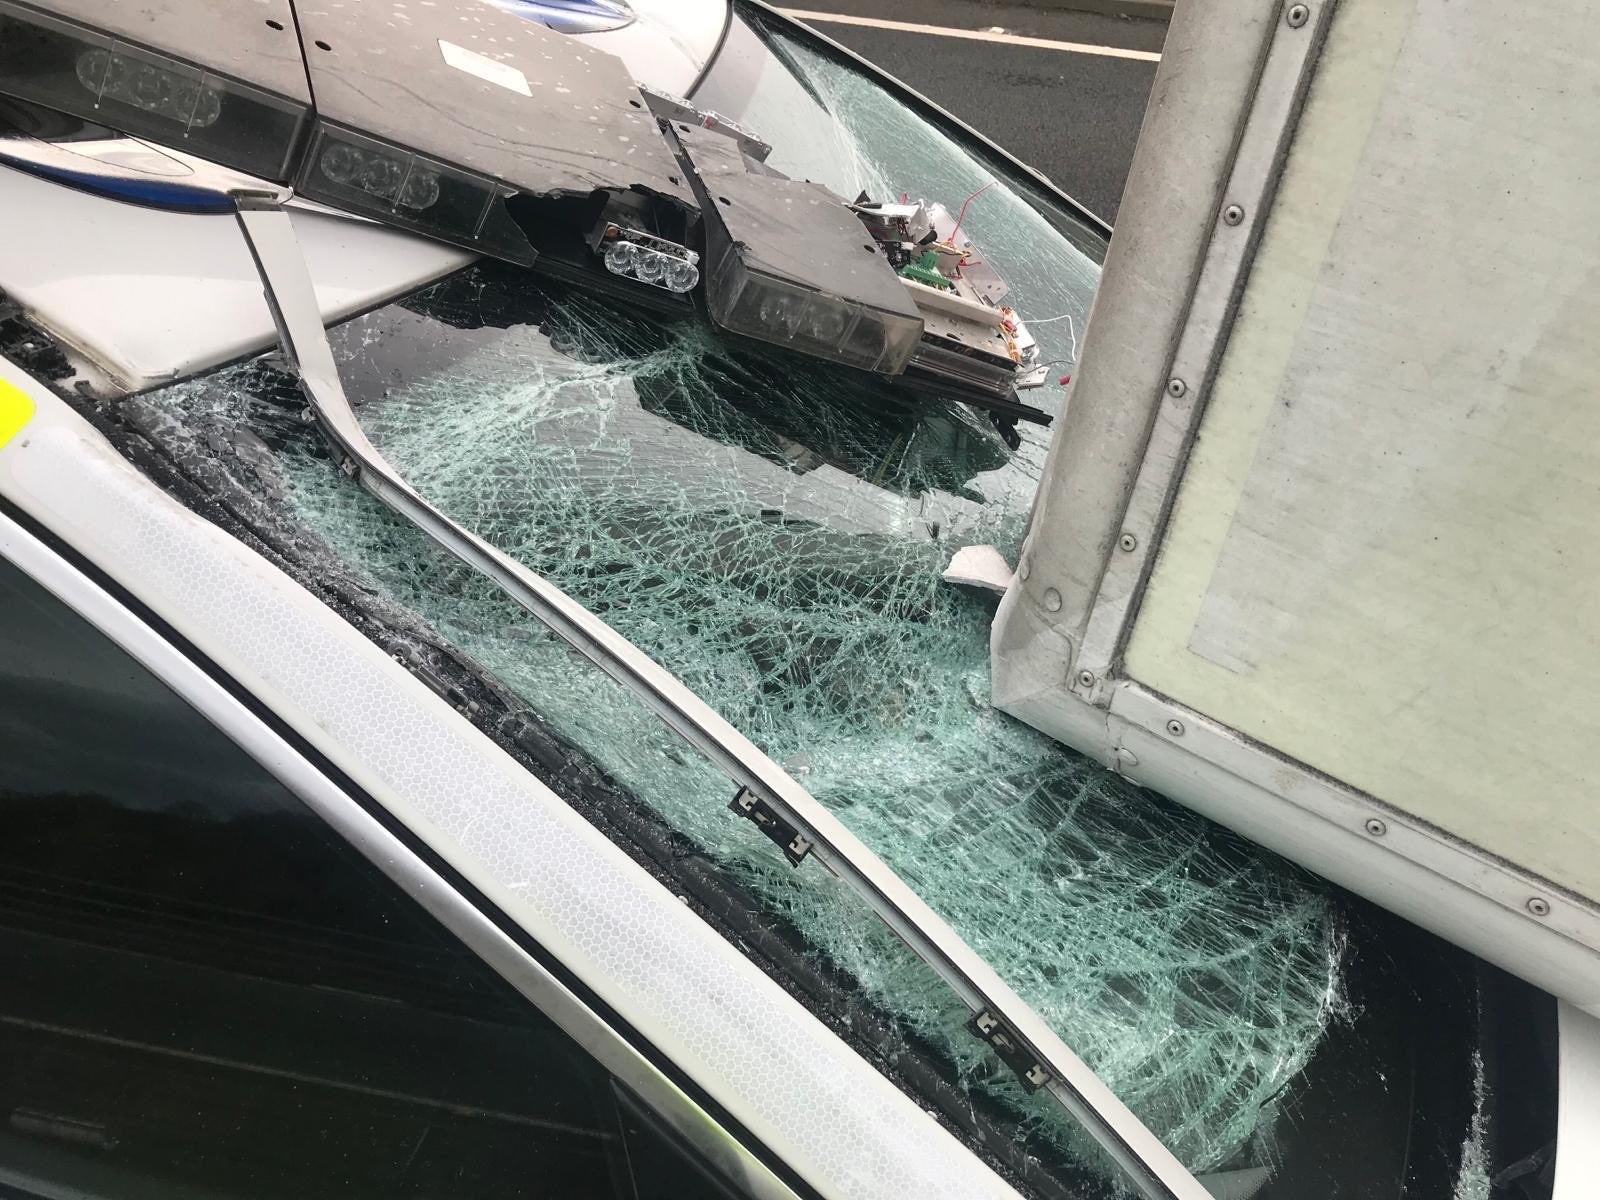 A police car was crushed by a lorry after it was blown over by strong winds on the A1 in Scotland while he was attending to another toppled HGV on 10 December, 2019.